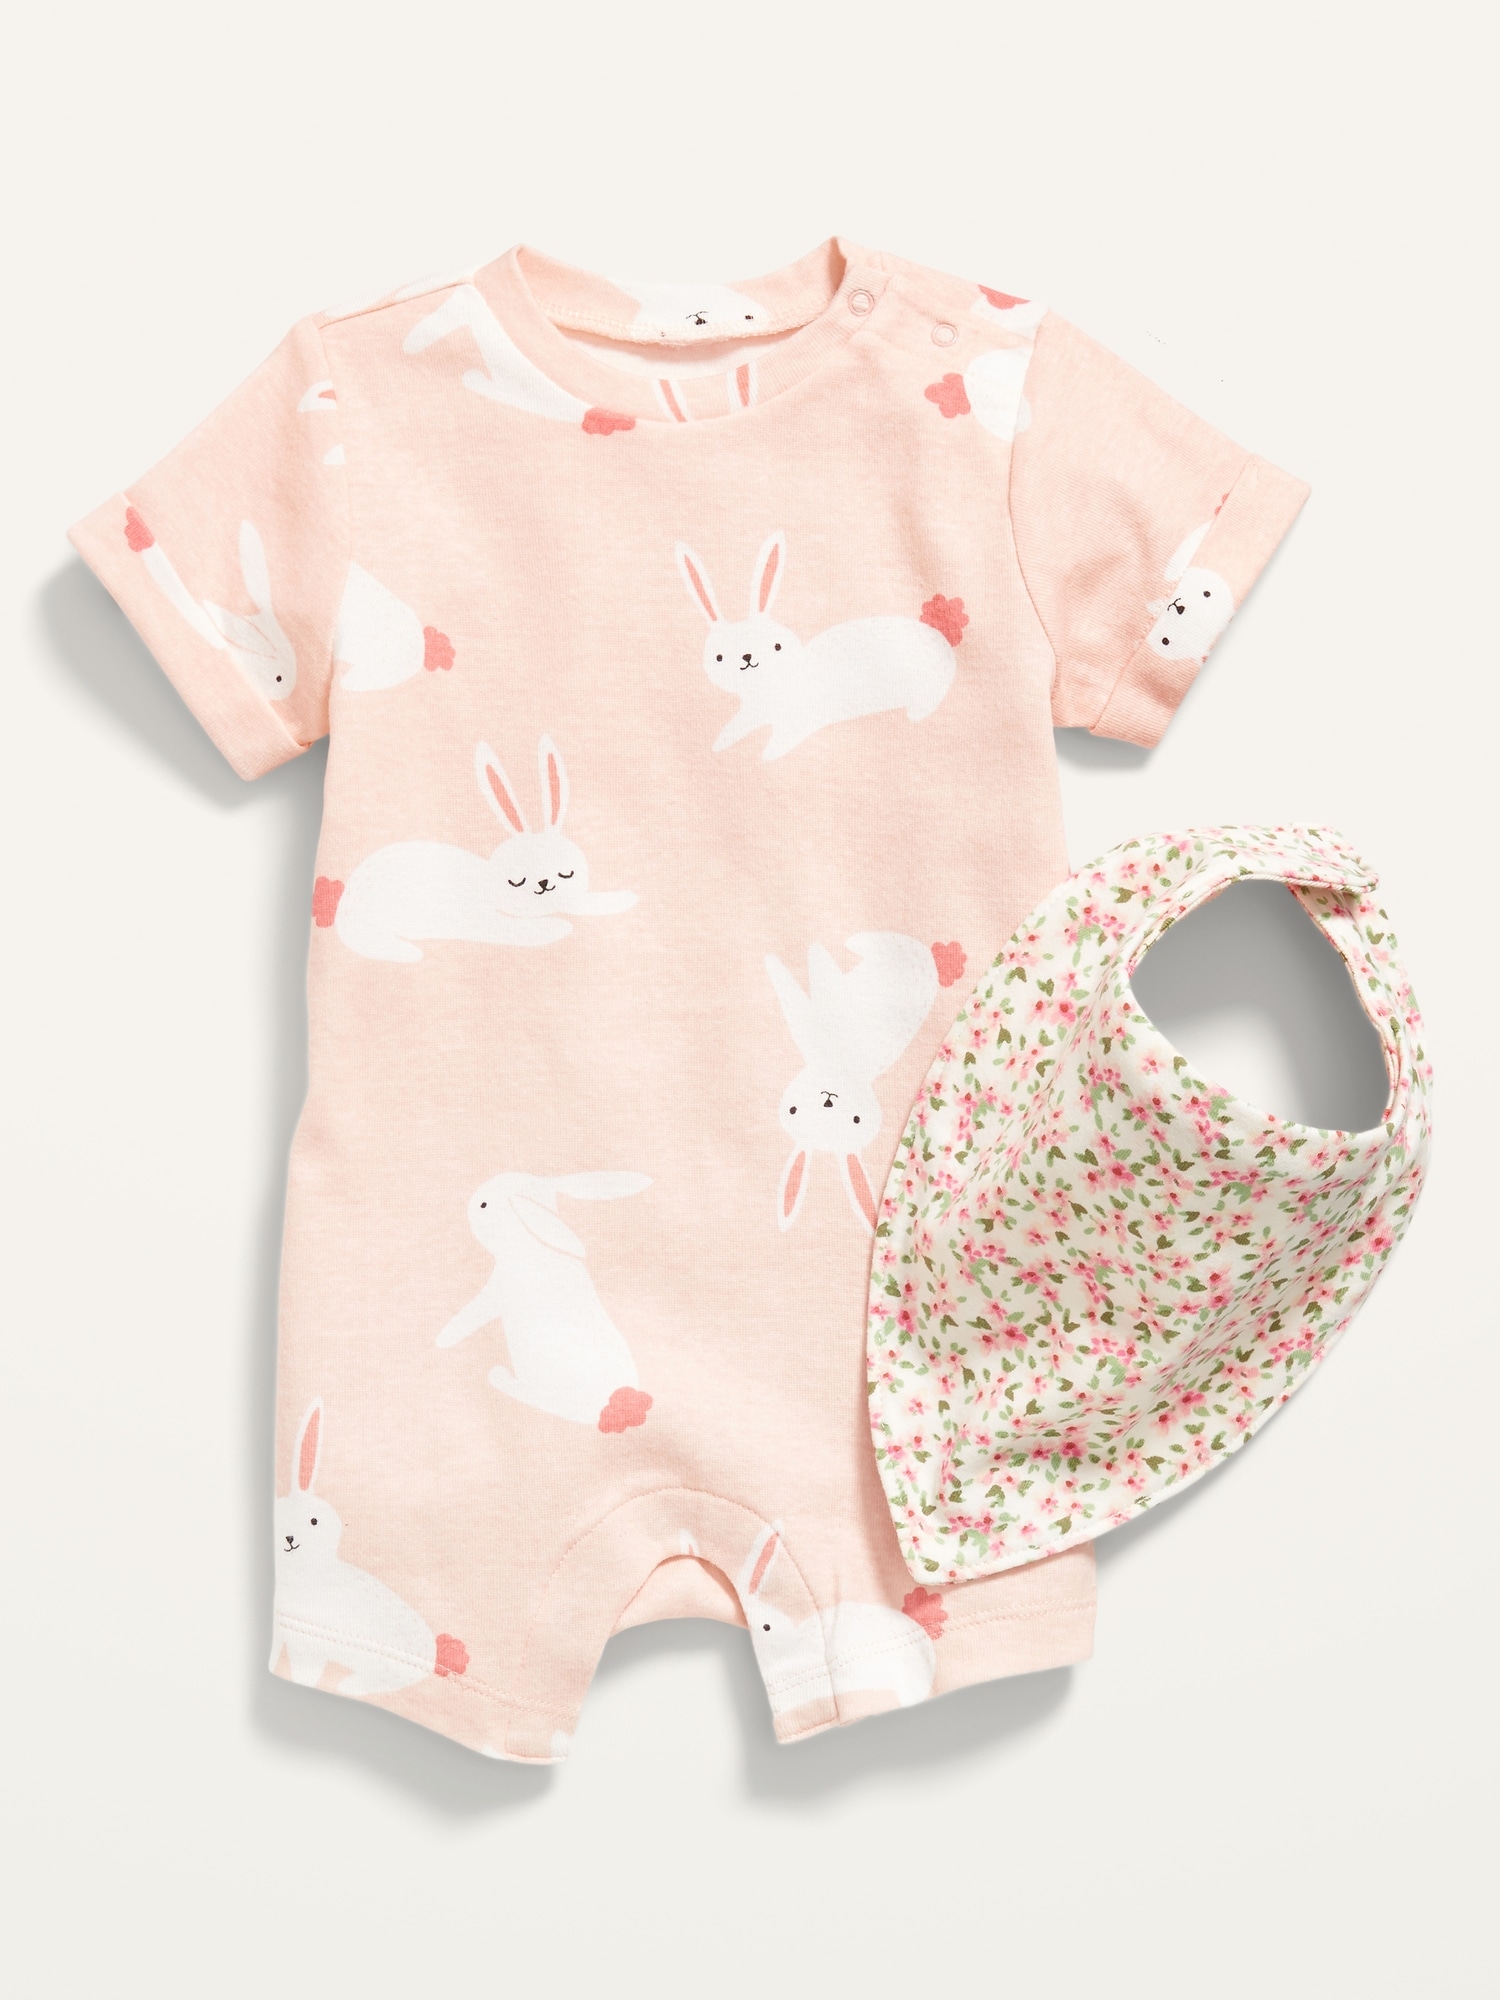 Bunny-Print One-Piece and Floral Bib Set for Baby